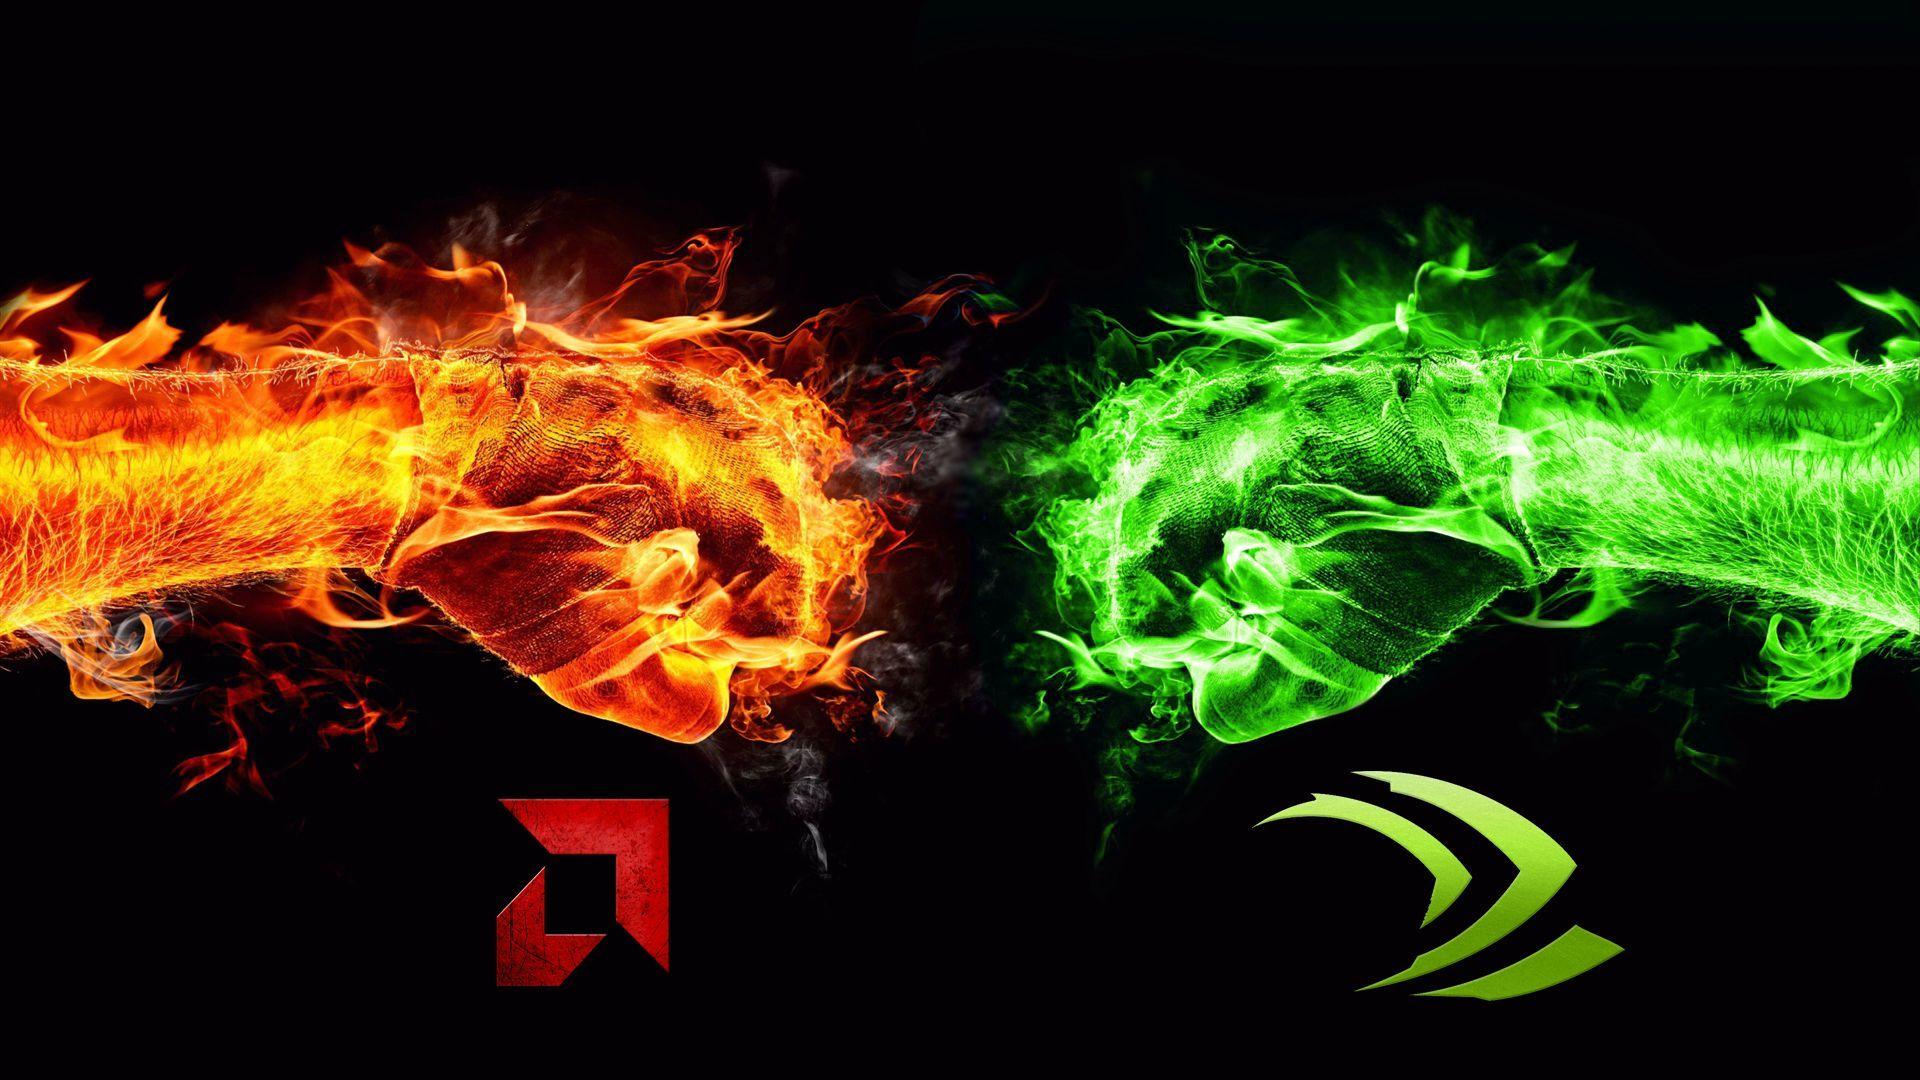 AMD vs Nvidia GPU Rankings and Purchase Recommendations for 2016